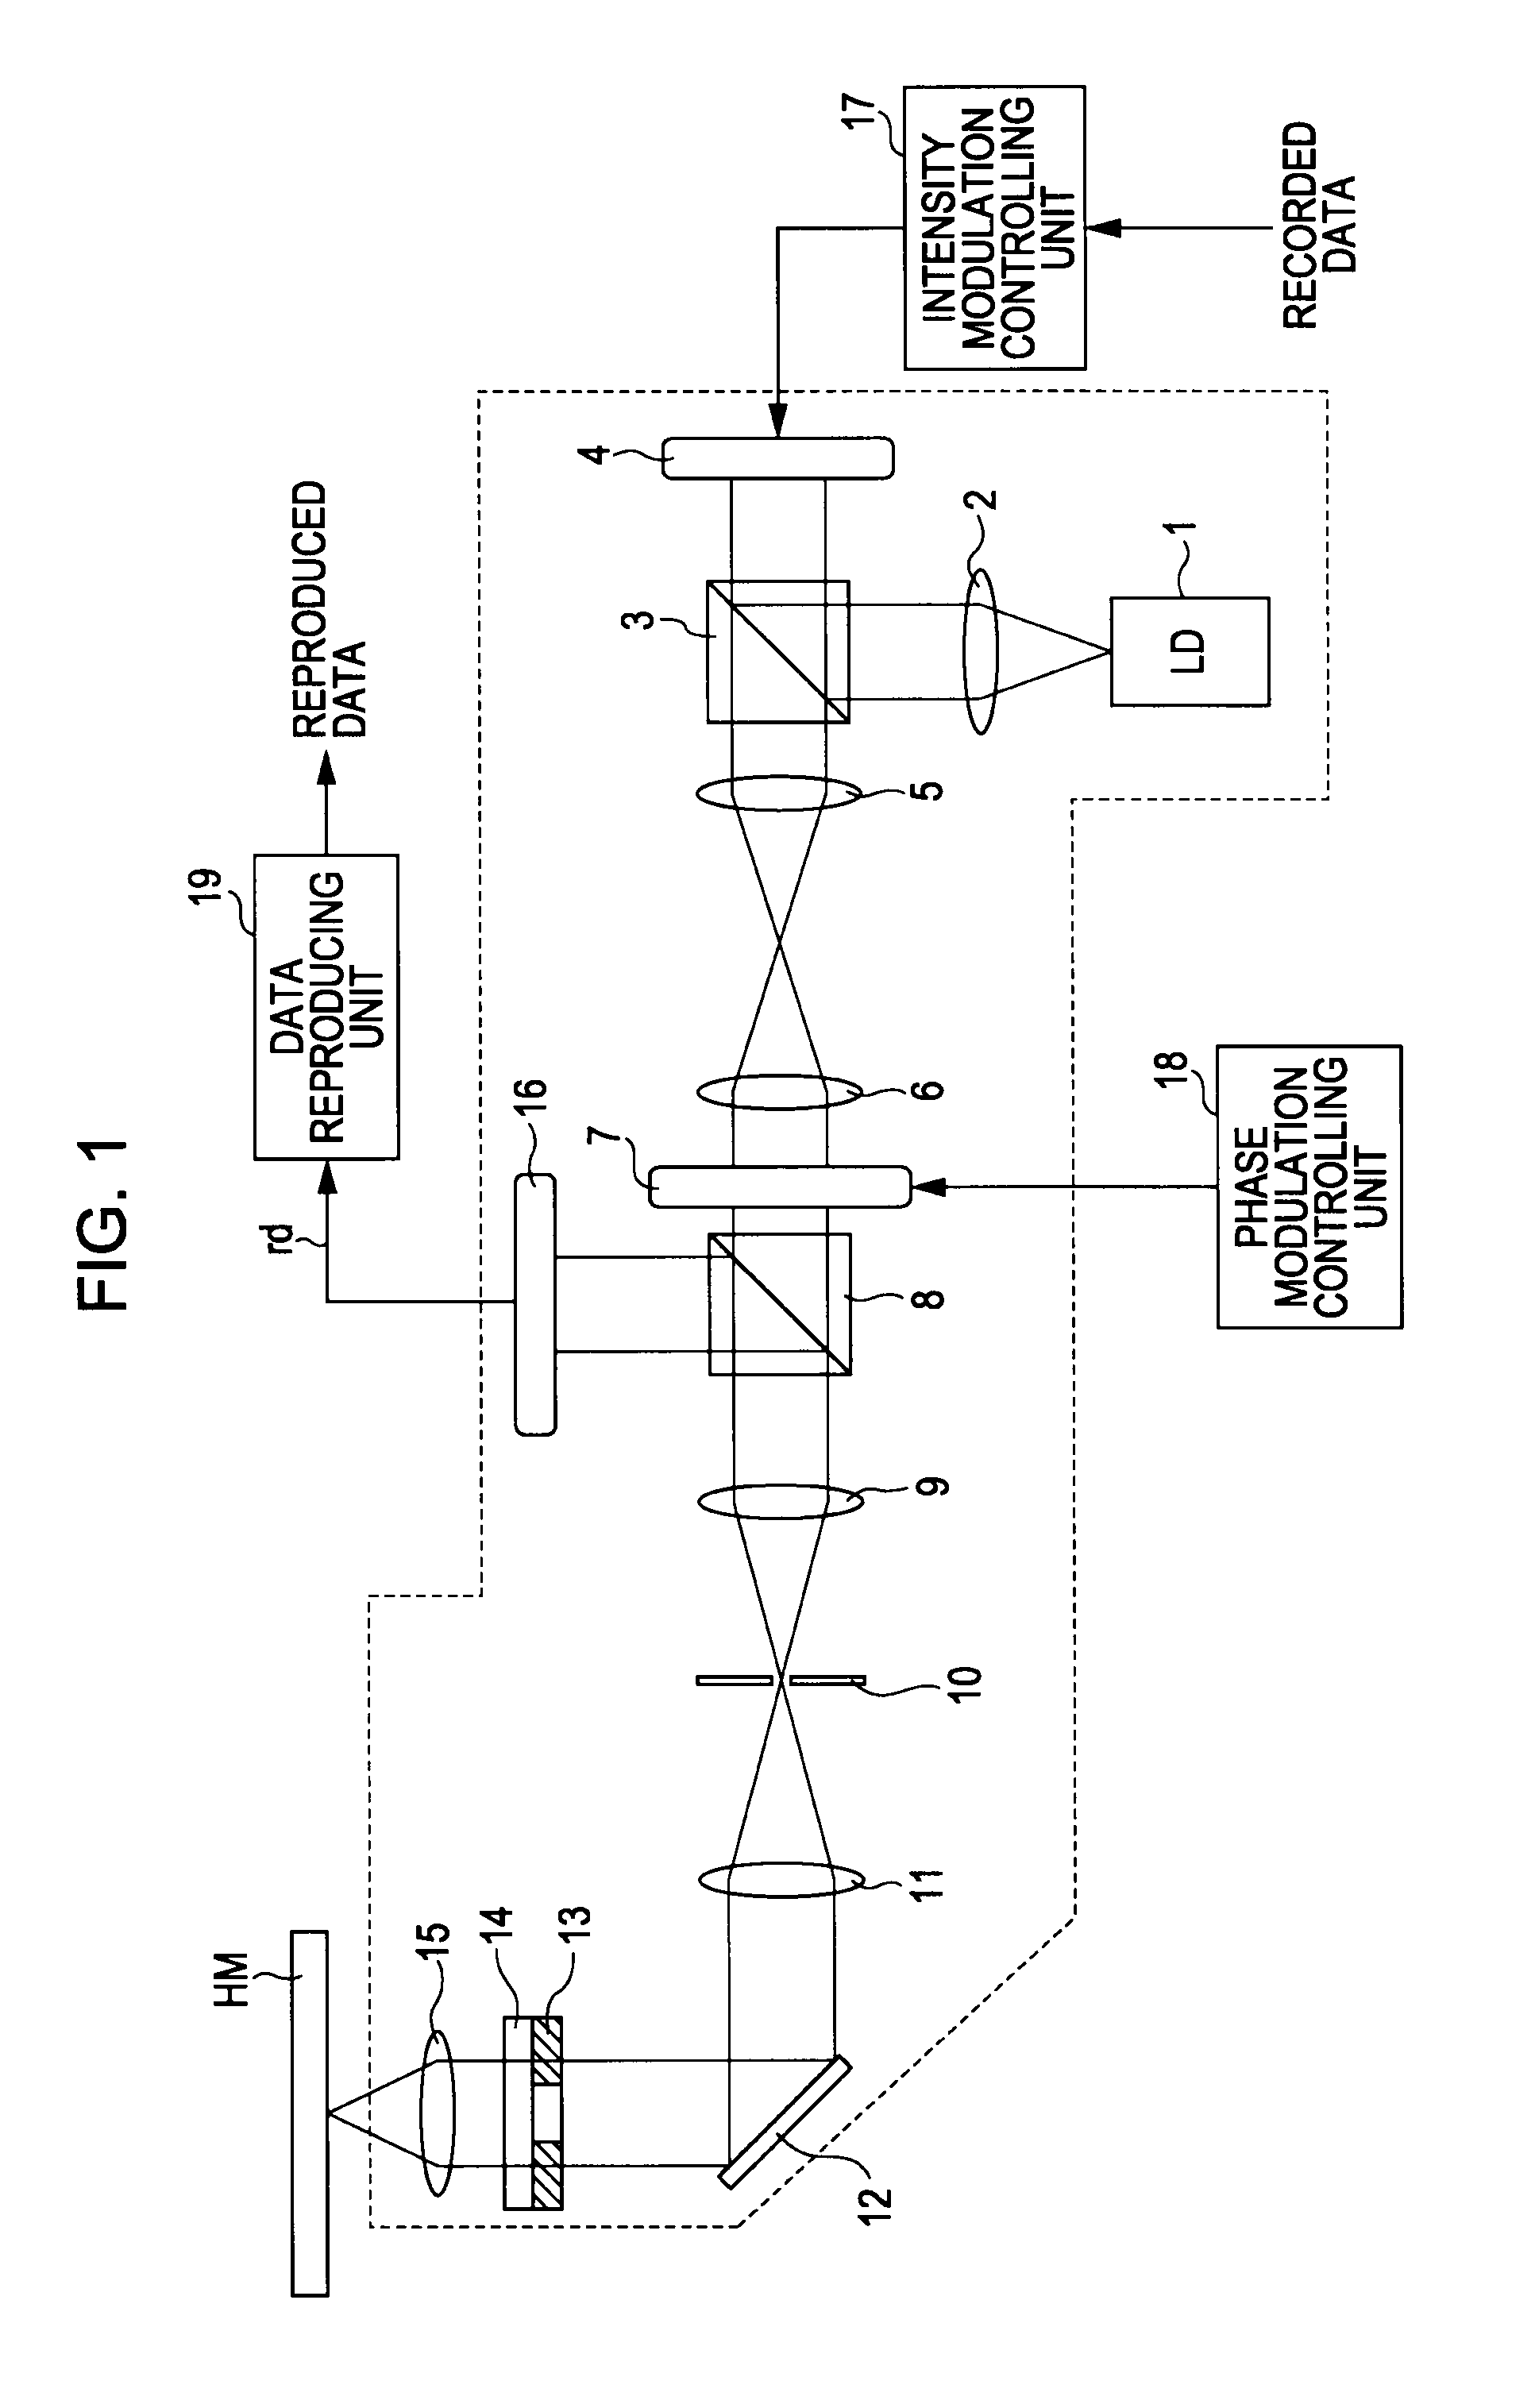 Reproducing device and reproducing method